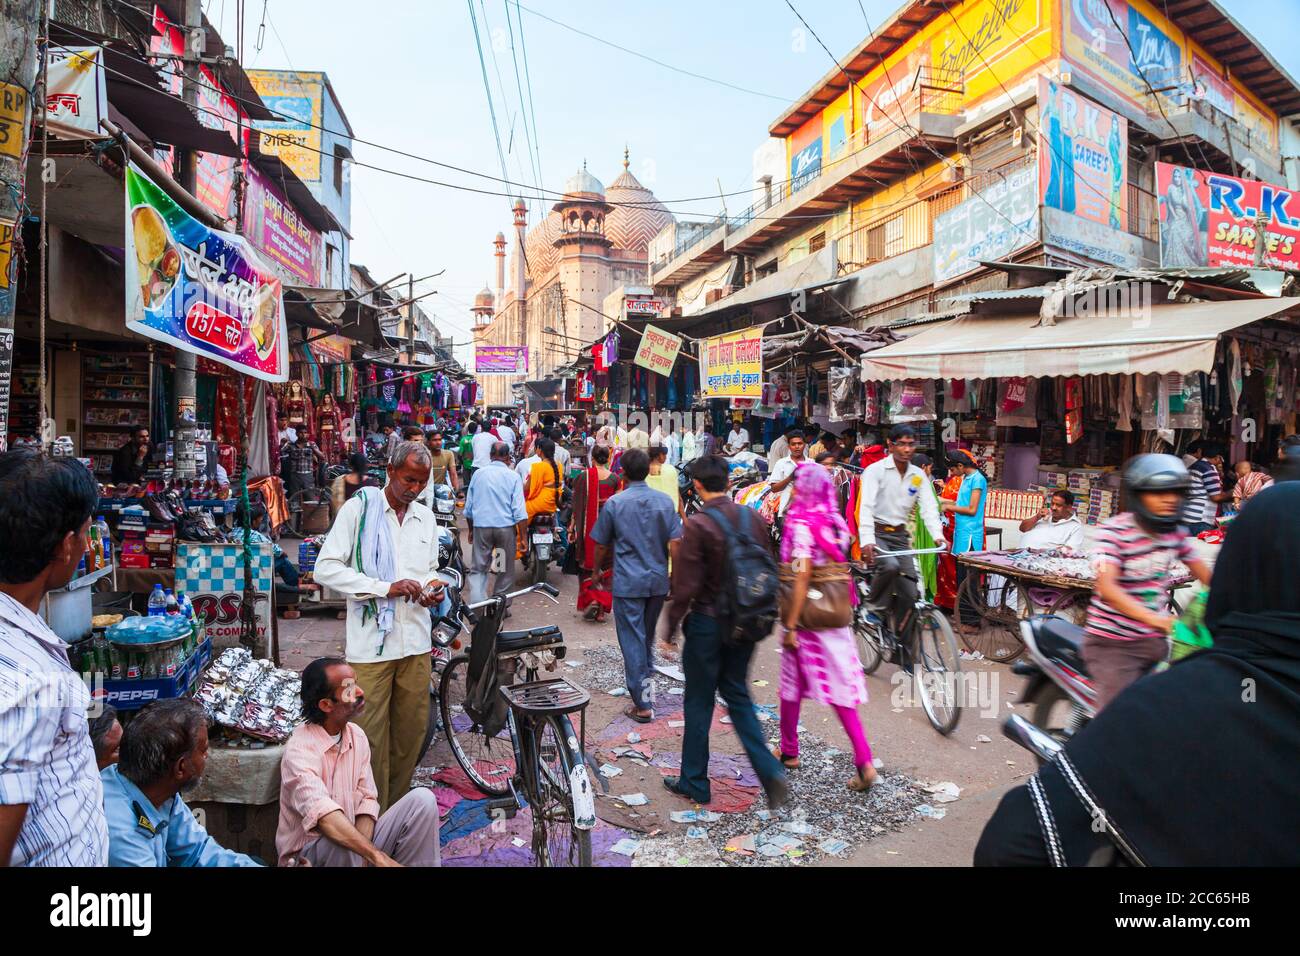 AGRA, INDIA - APRIL 10, 2012: A lot of garbage on the street in Agra city, Uttar Pradesh state of India Stock Photo